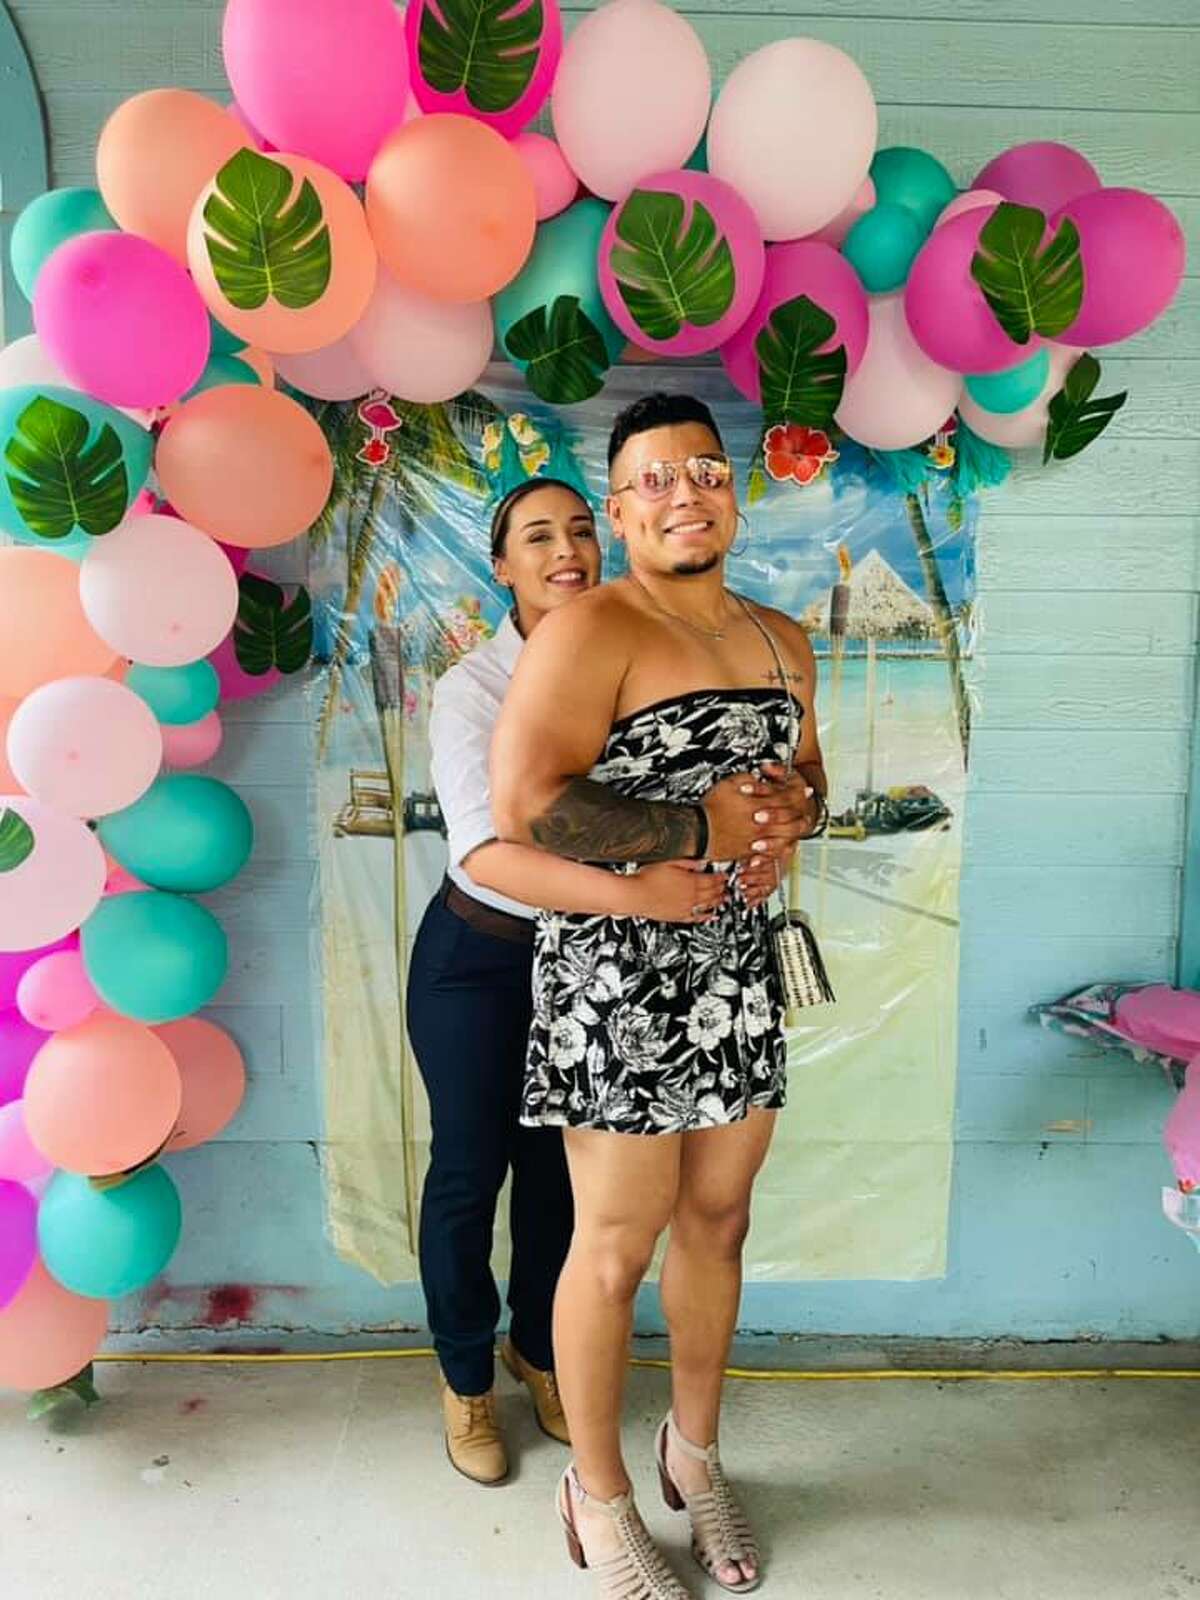 Alexis Collins and Jordan Santos stole the show at a "Dress Like Your Spouse" party hosted by their family that has now gone viral on Facebook. 